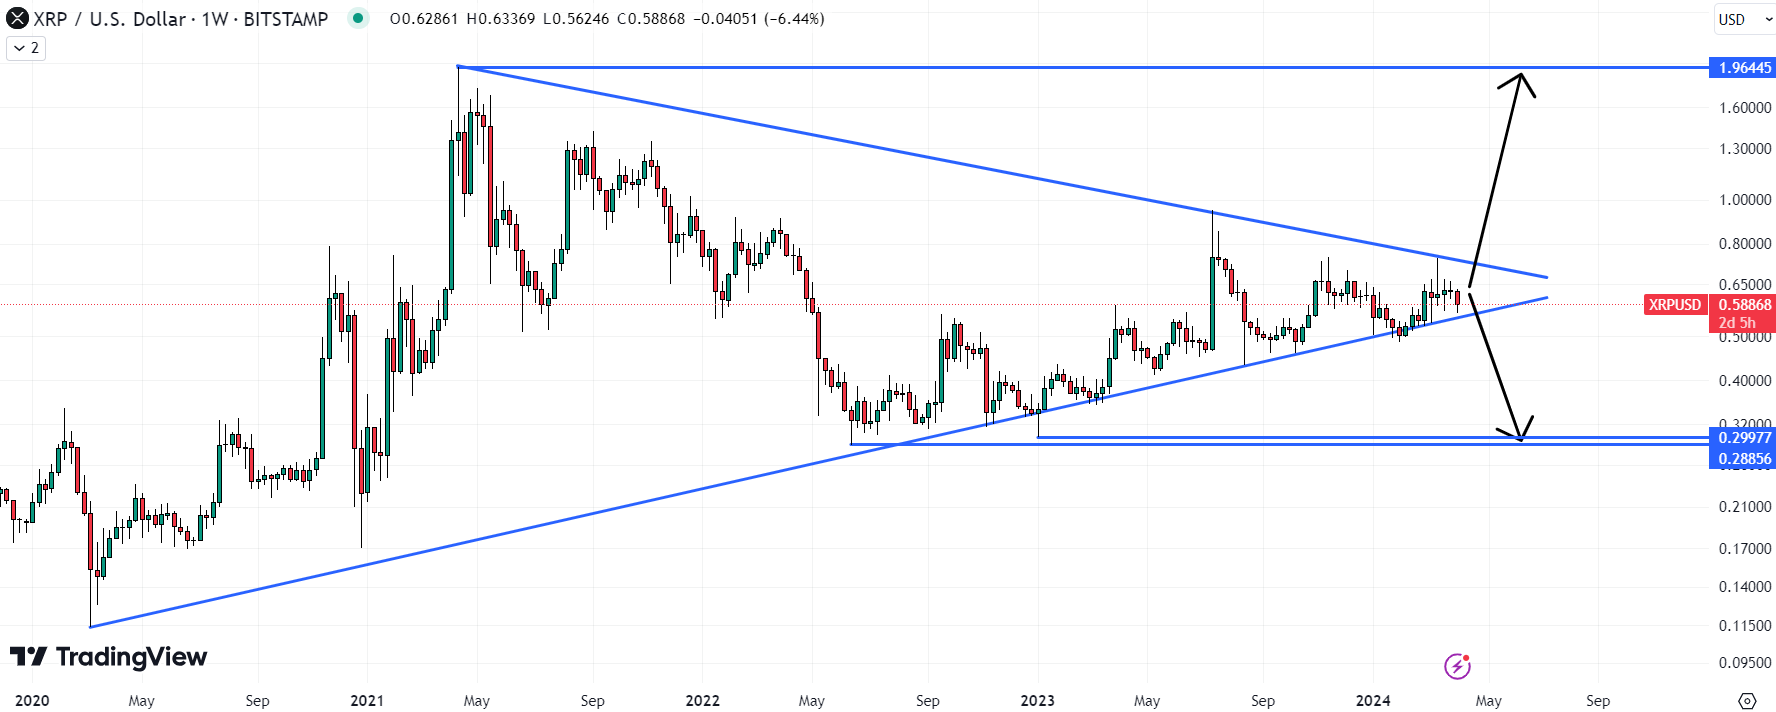 A long-term assessment of the XRP price suggests it has formed a pennant structure in the last four years. 